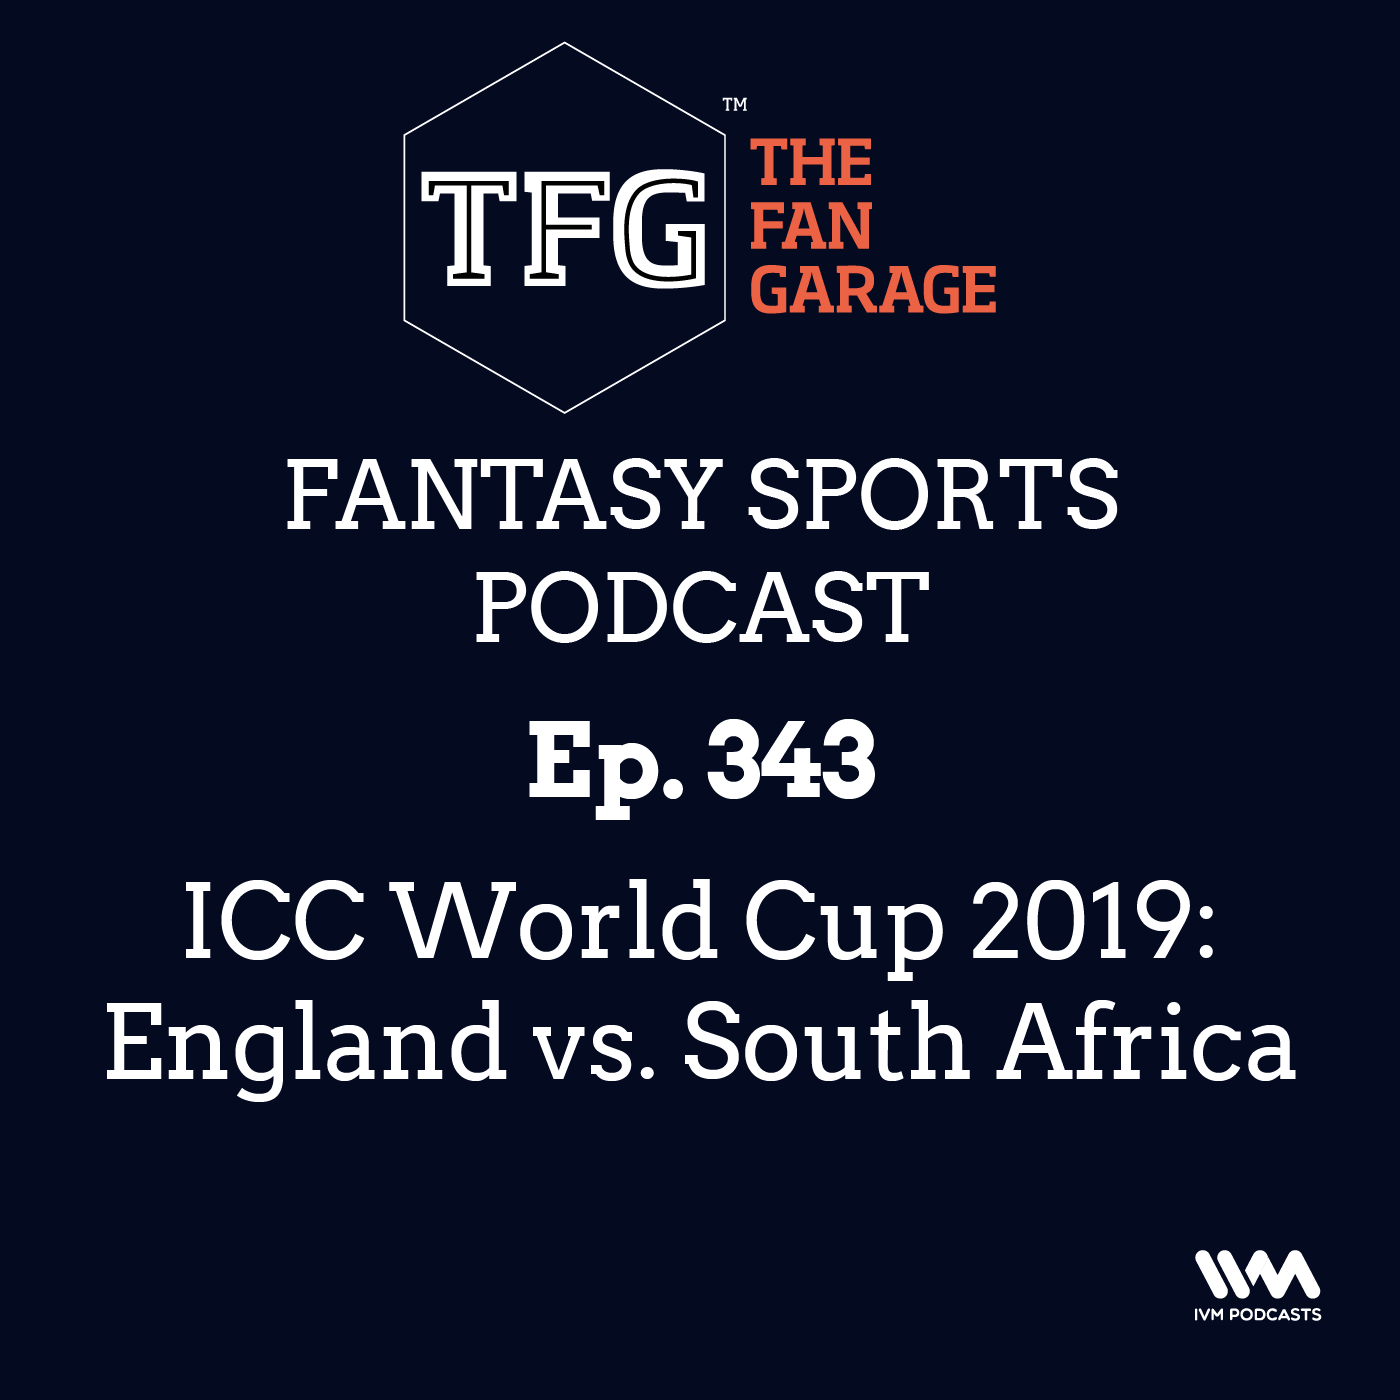 TFG Fantasy Sports Podcast Ep. 343: ICC World Cup 2019: England vs. South Africa